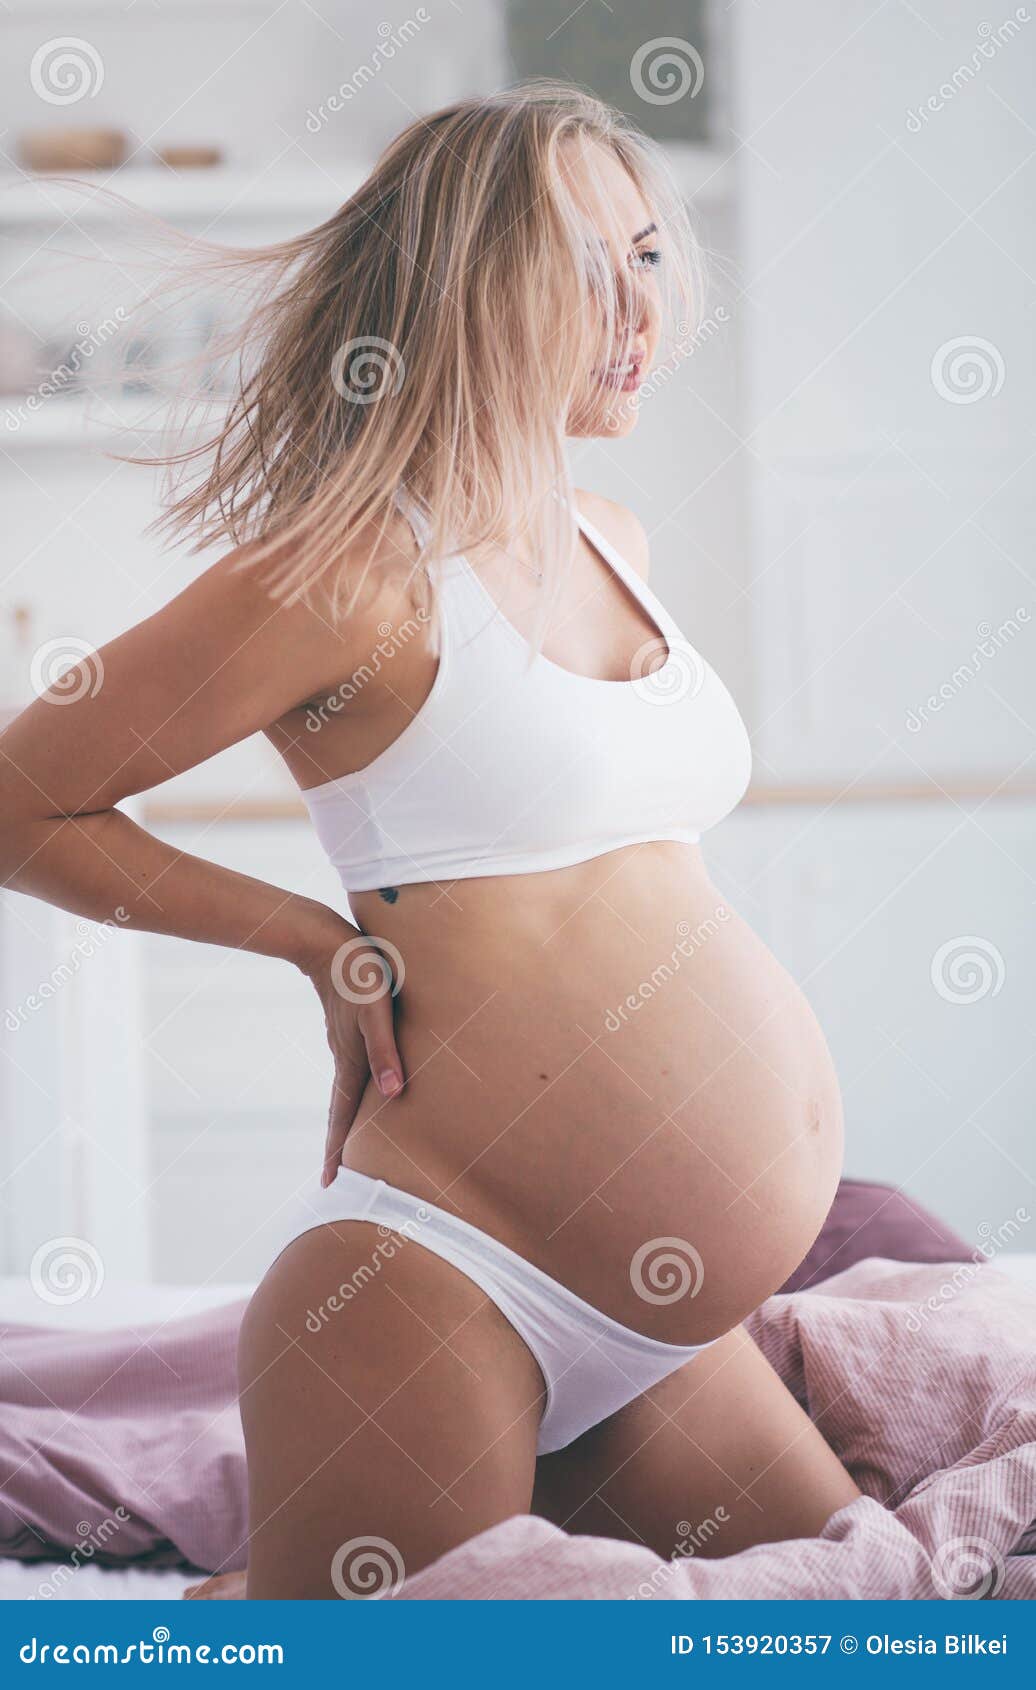 Beautiful Pregnant Woman in Underwear Stretching on the Bed in the Morning  Stock Image - Image of awake, human: 153920357